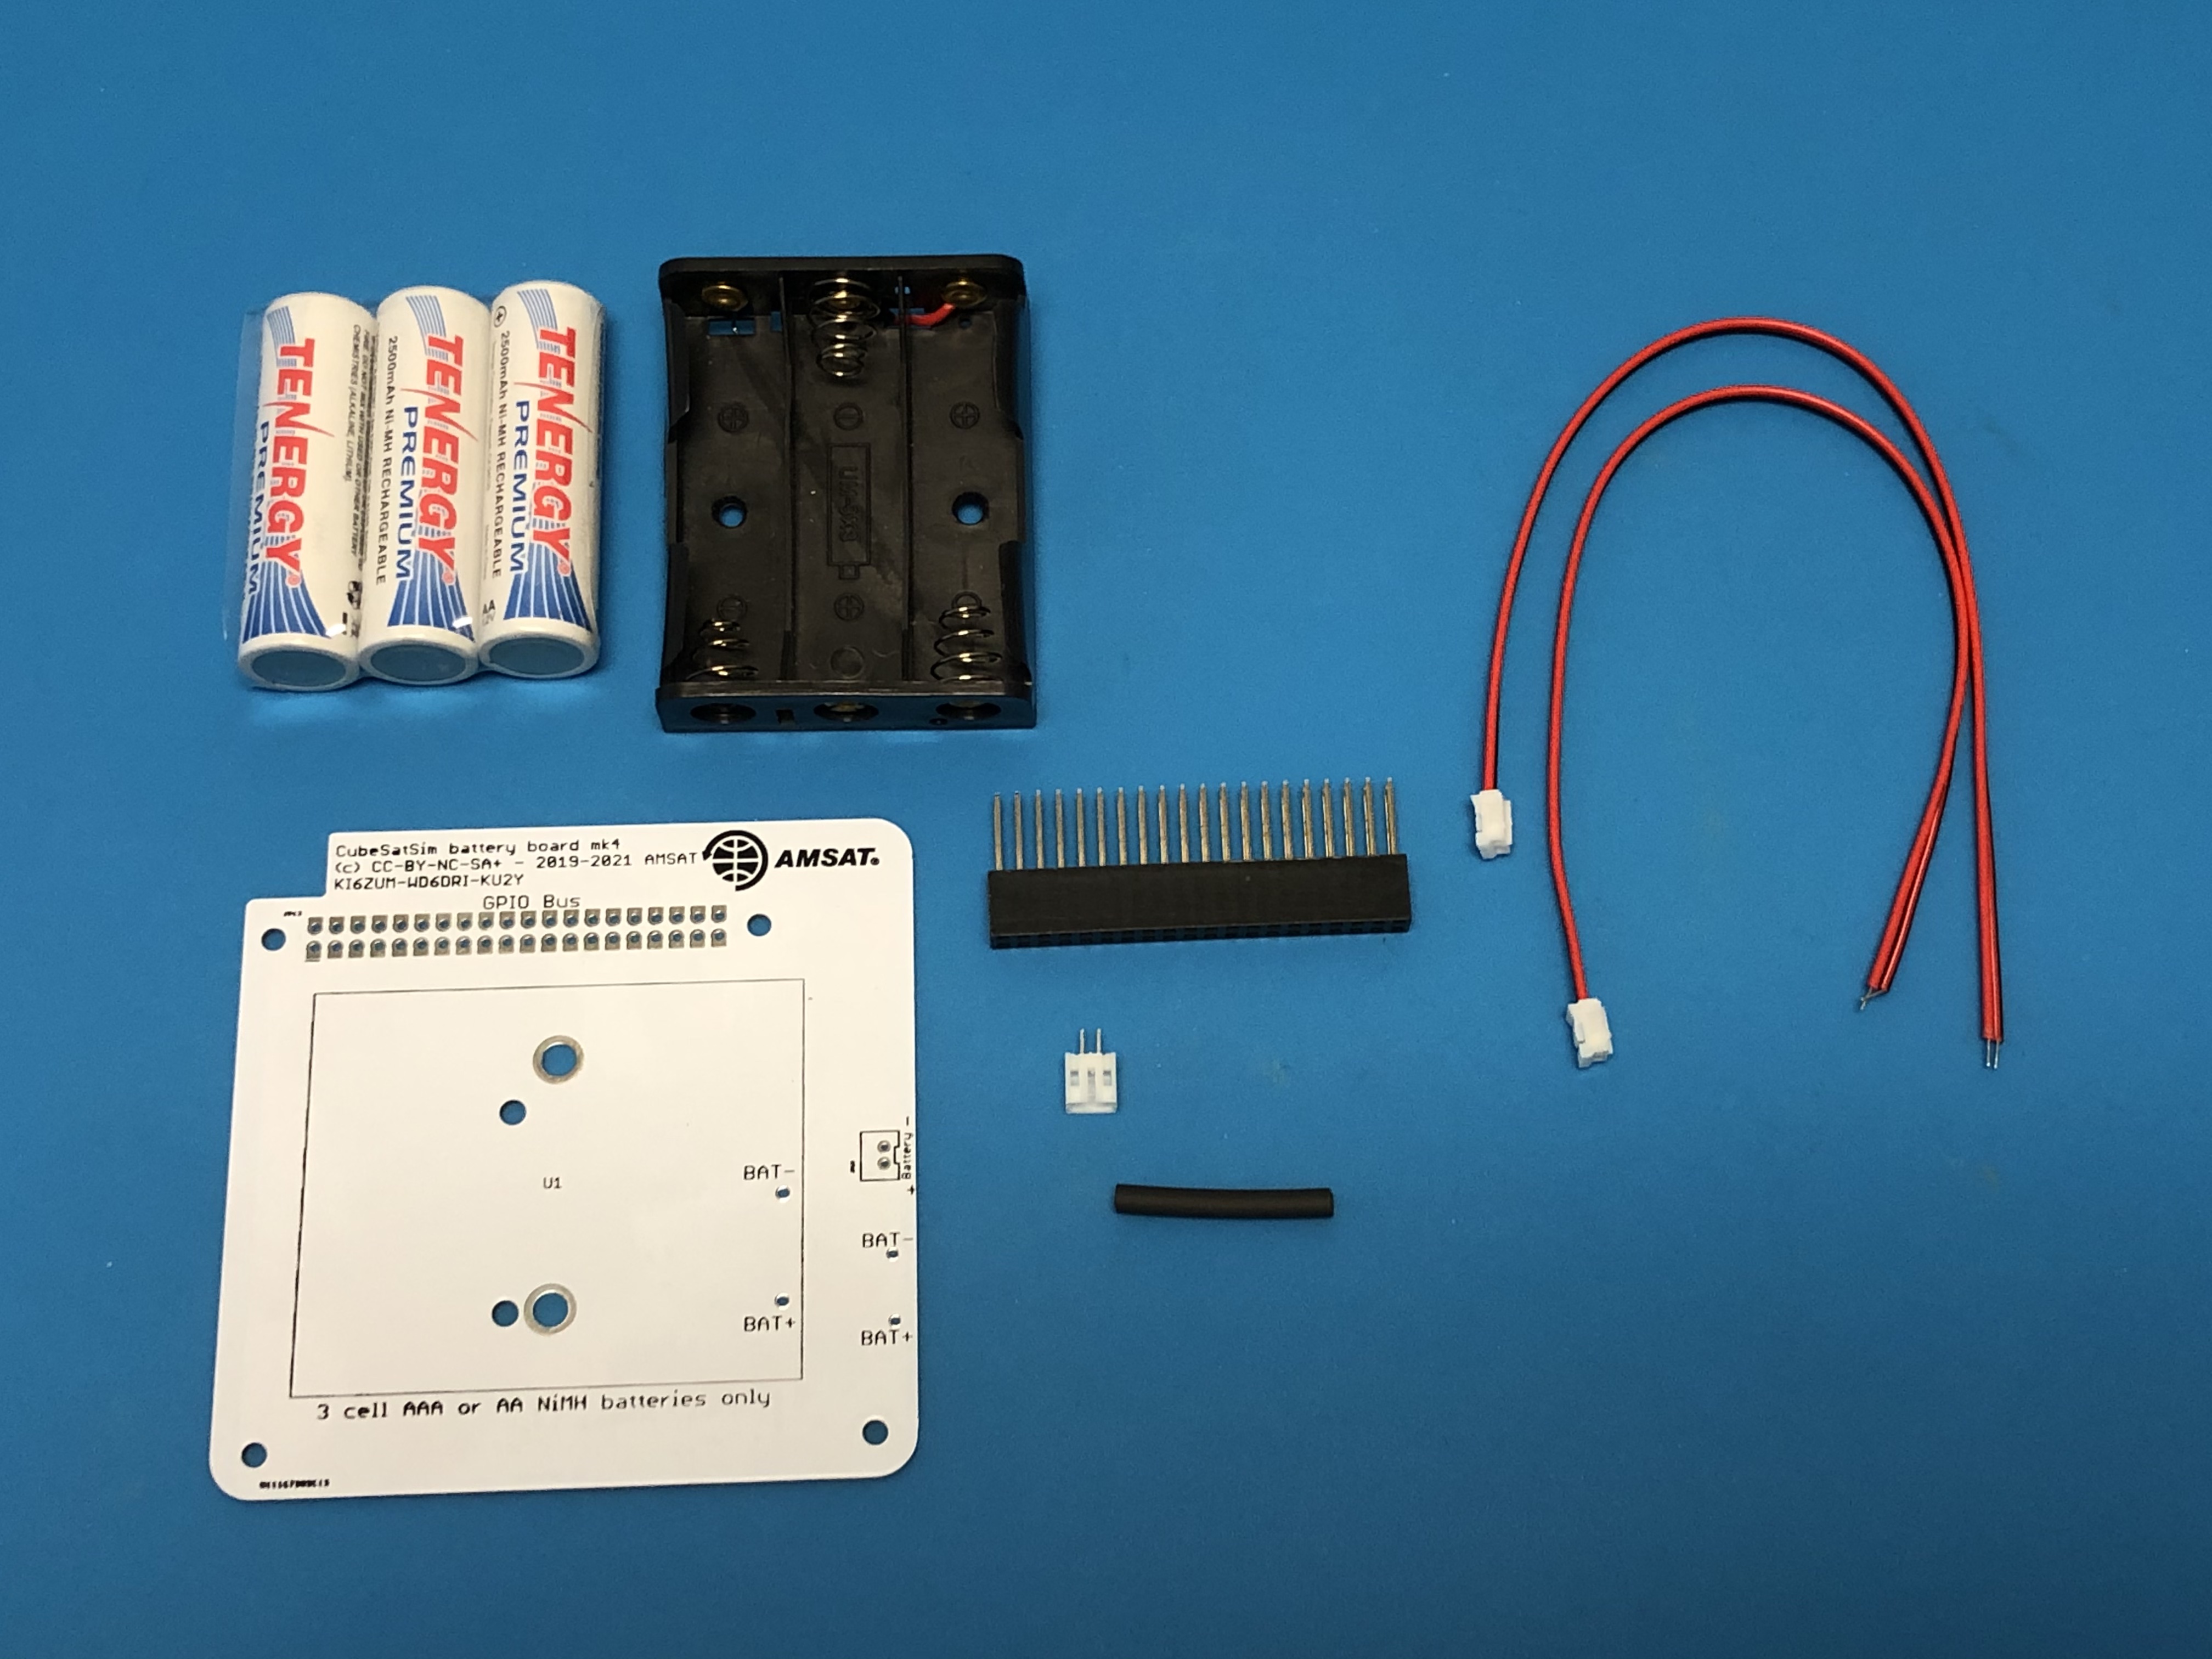 Battery Board parts